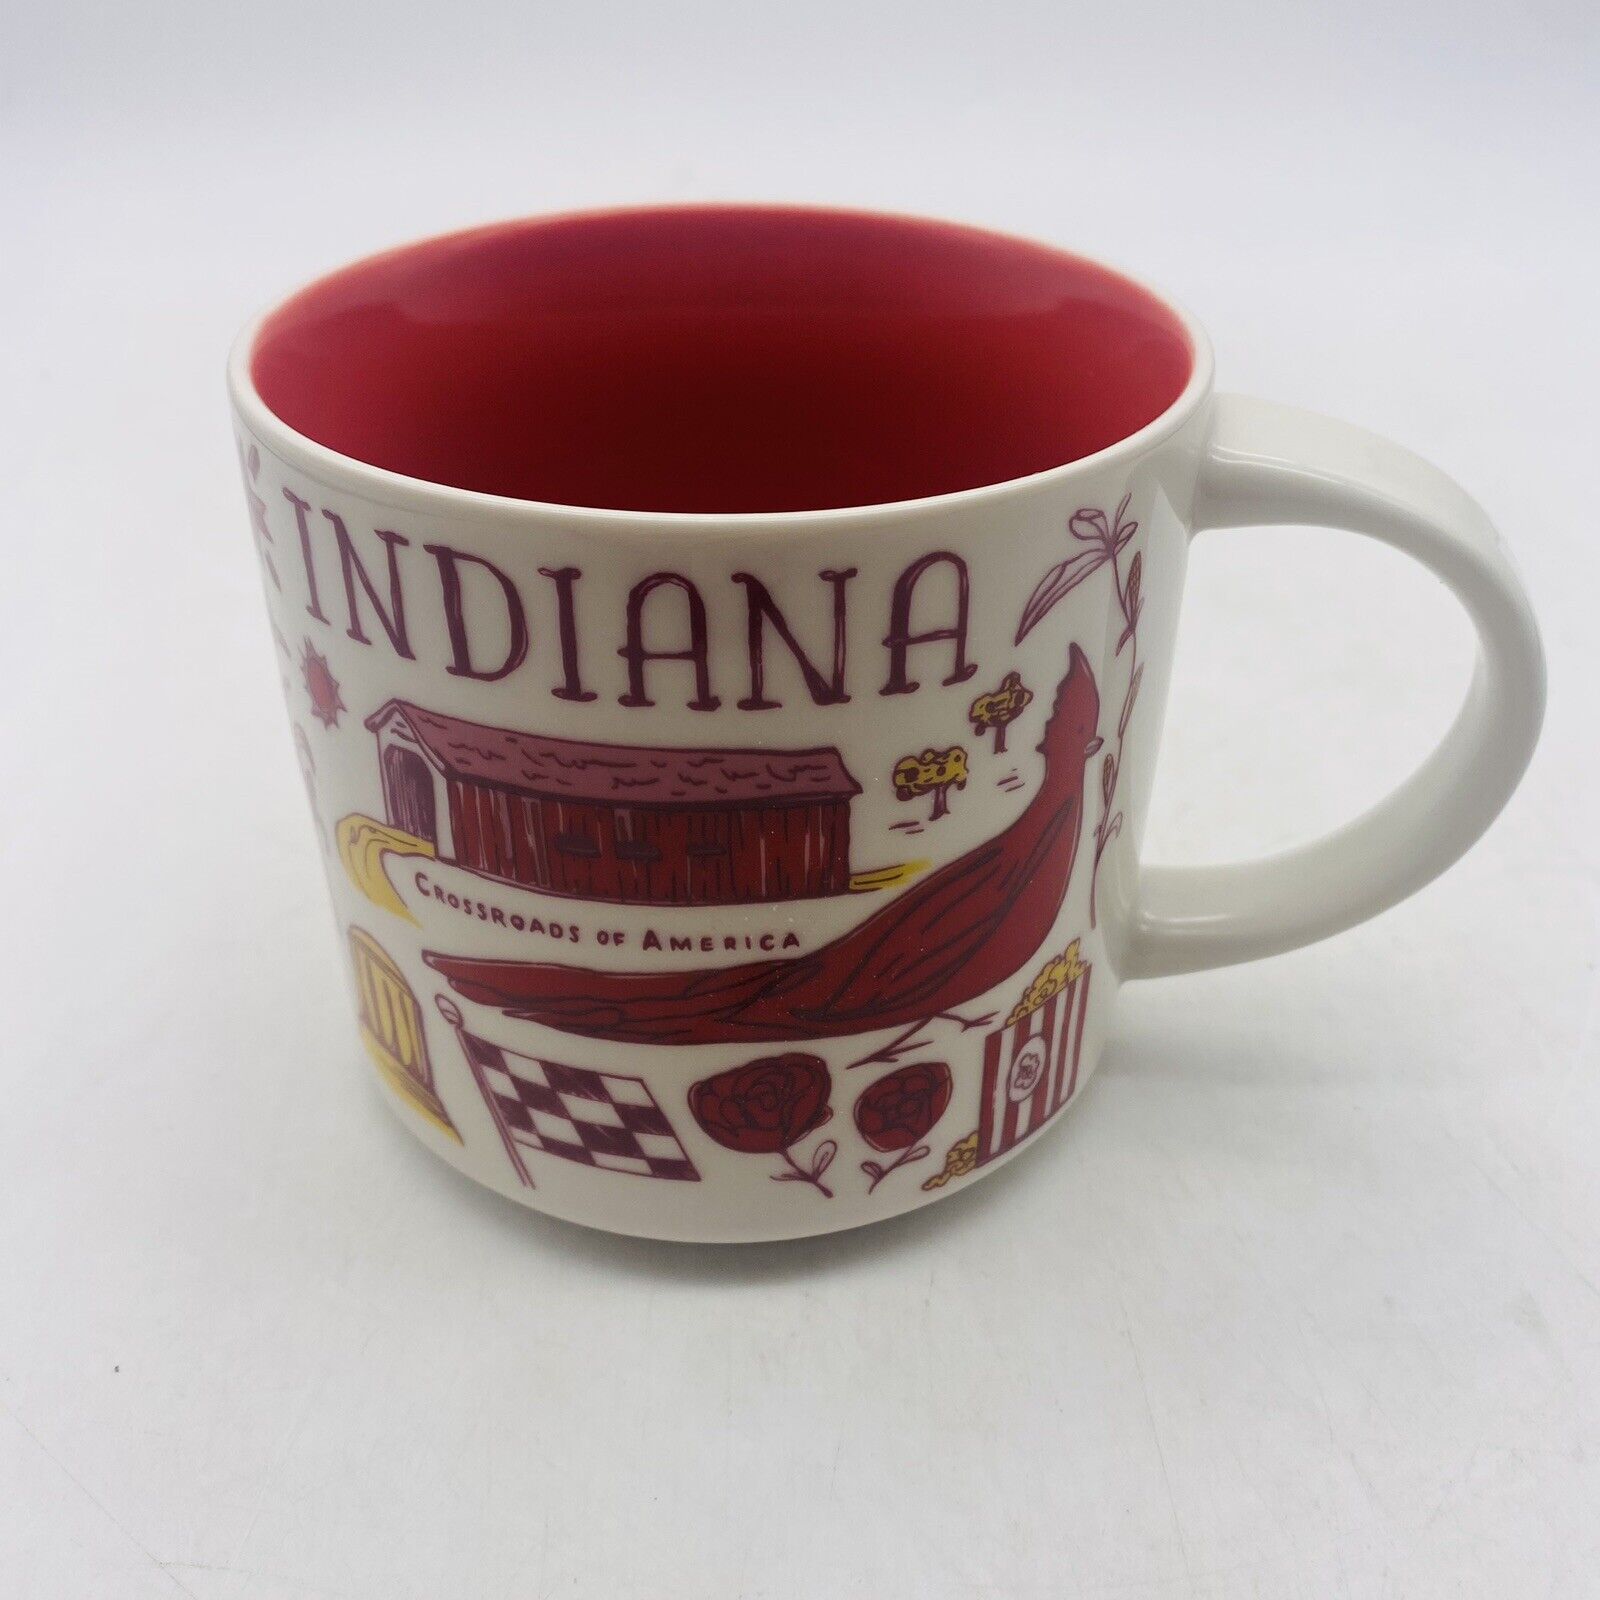 Starbucks Been There Series Indiana Mug 2018 Red Across the Globe Coffee Cup